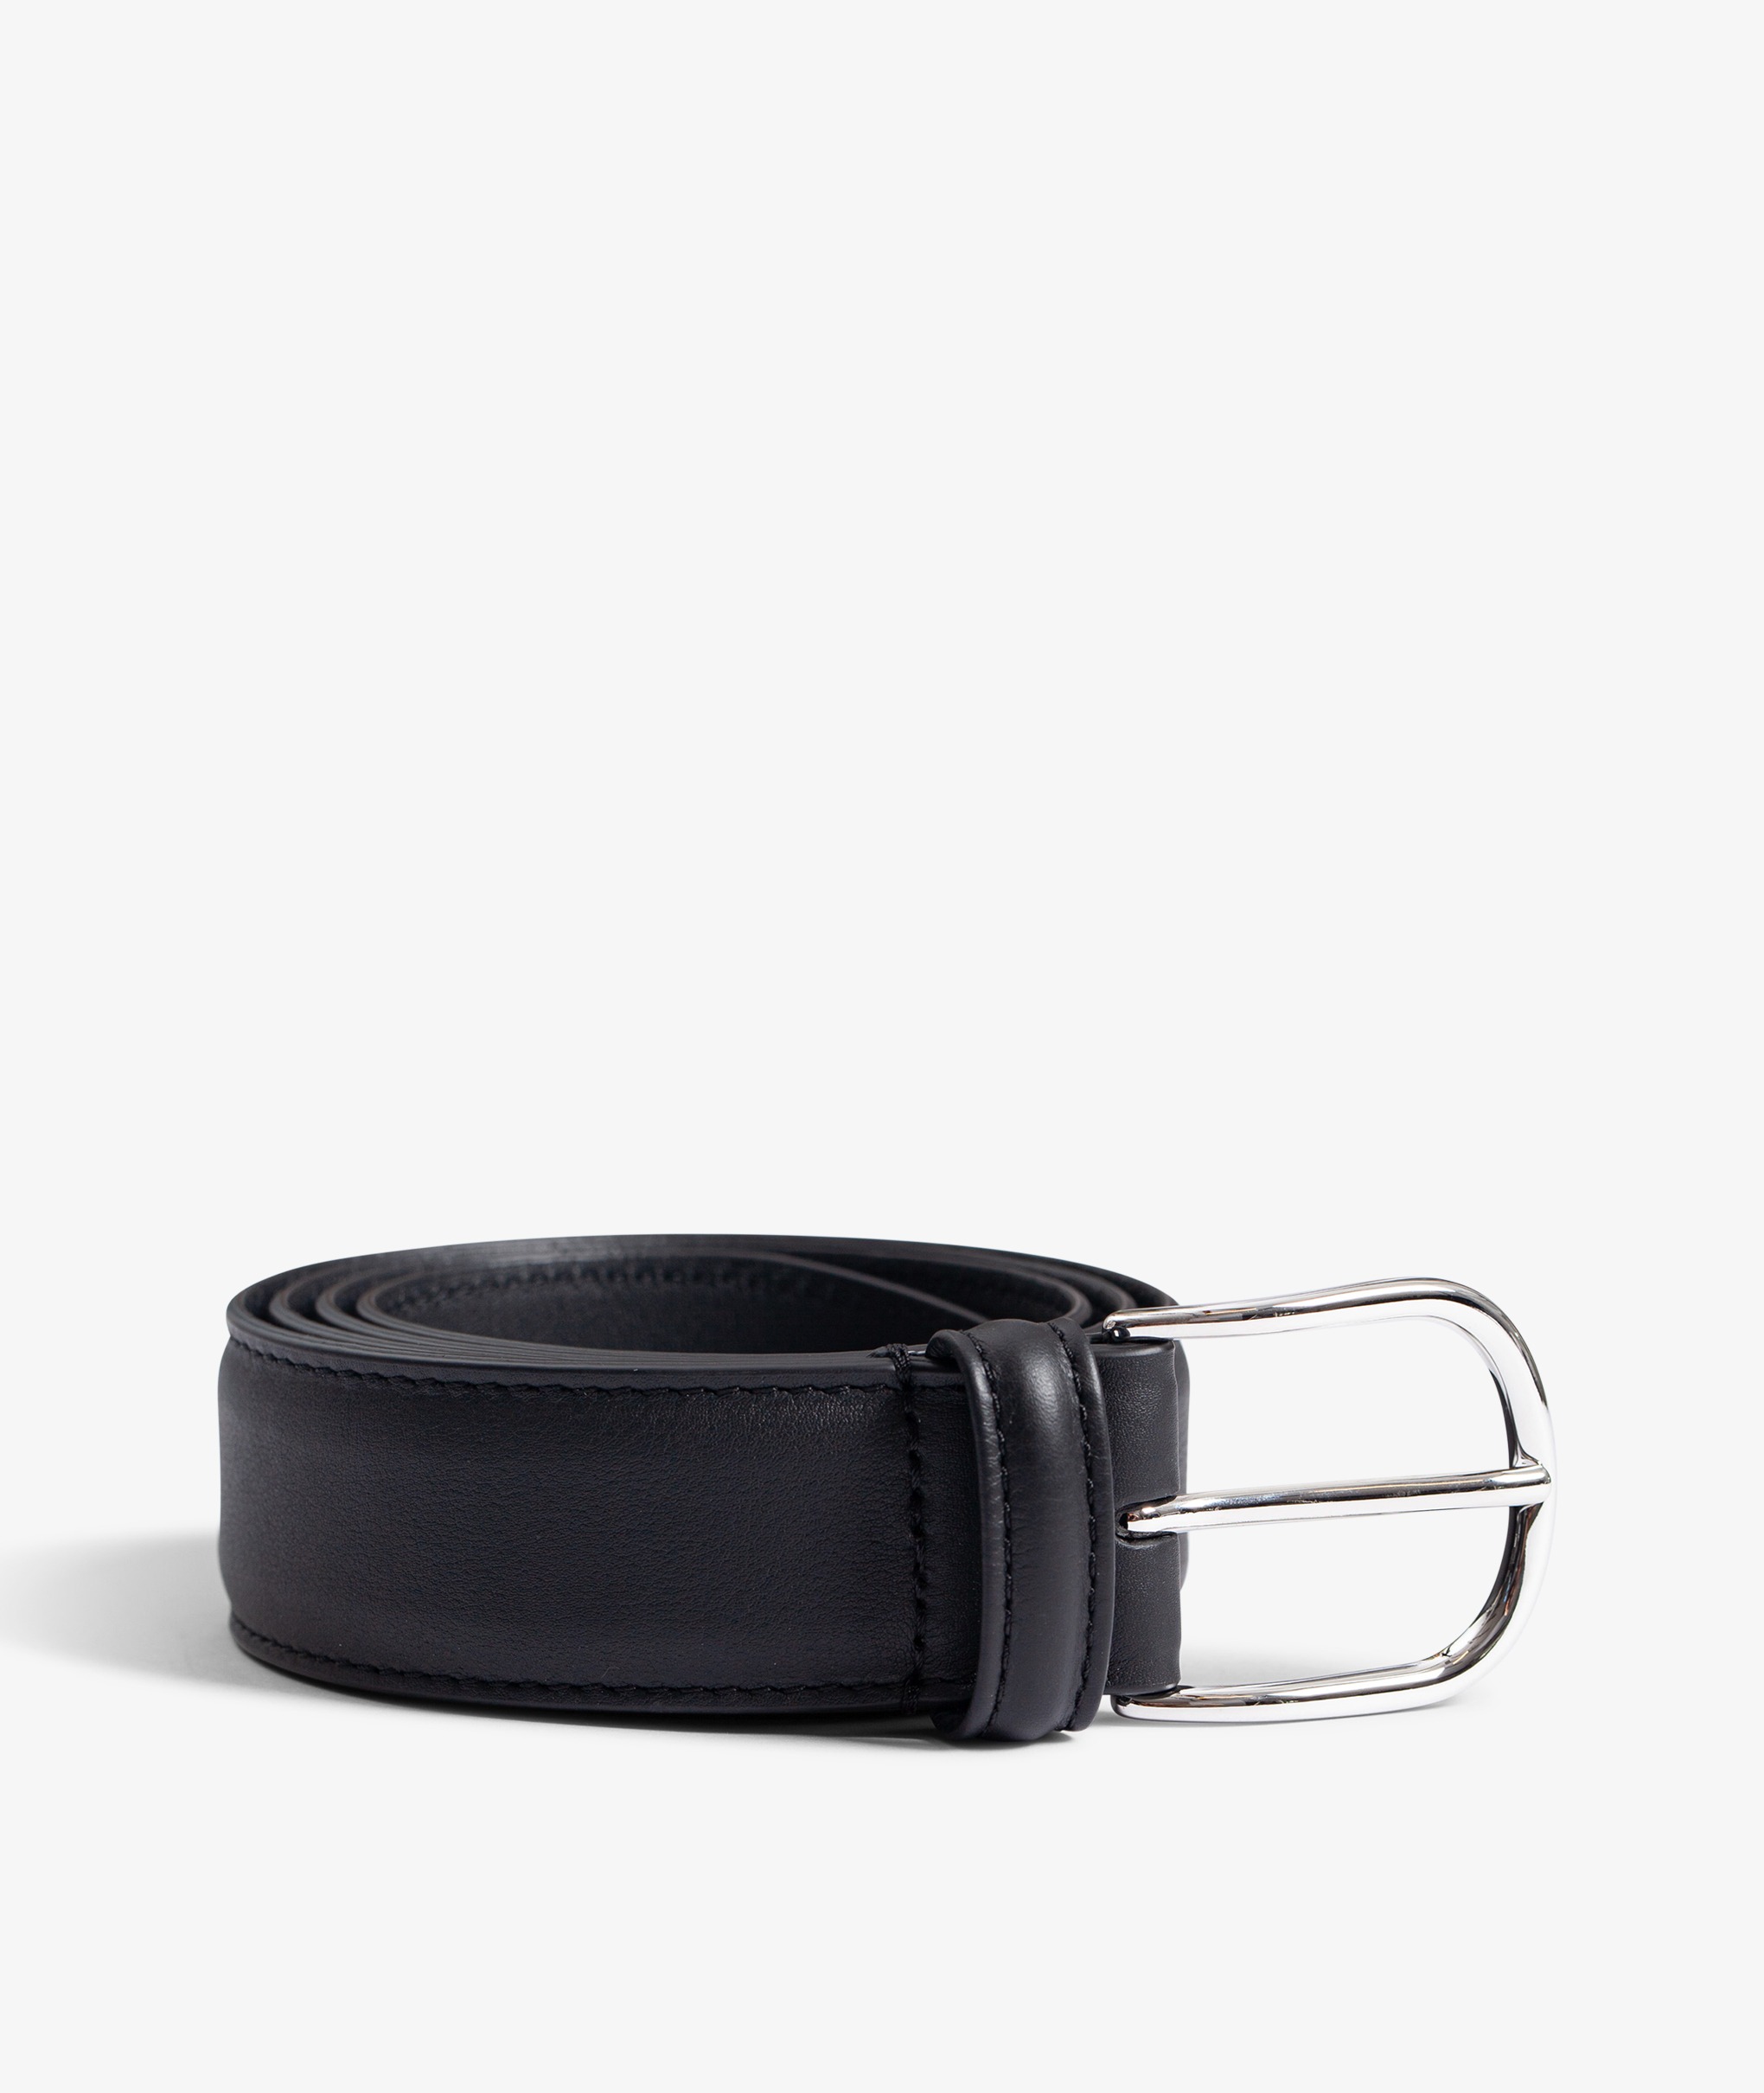 Norse Store  Shipping Worldwide - Anderson's Classic Leather Belt